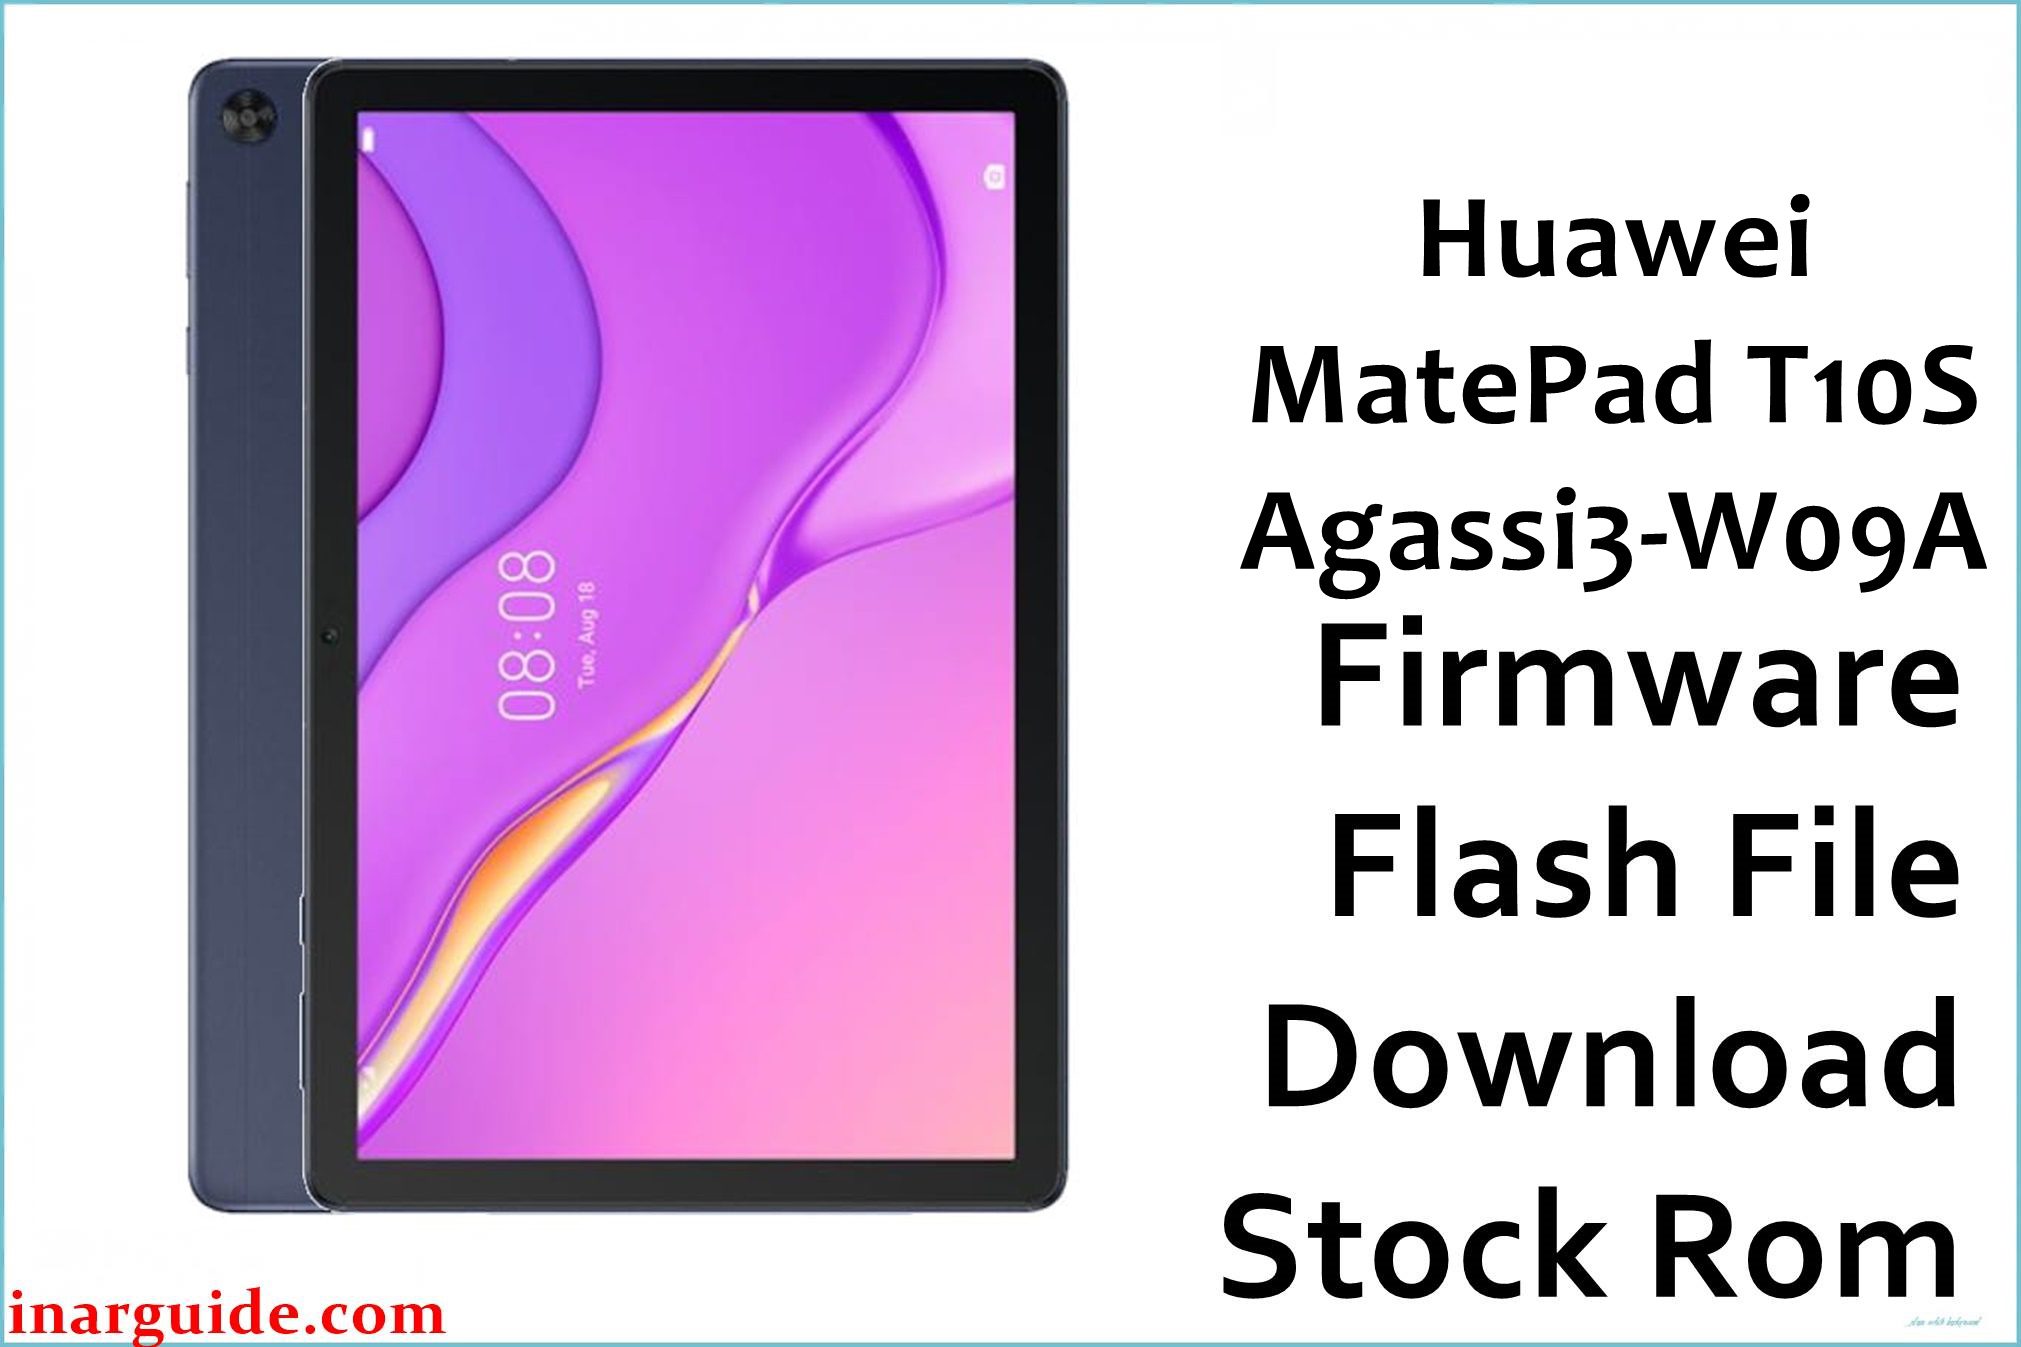 Huawei MatePad T10S Agassi3 W09A